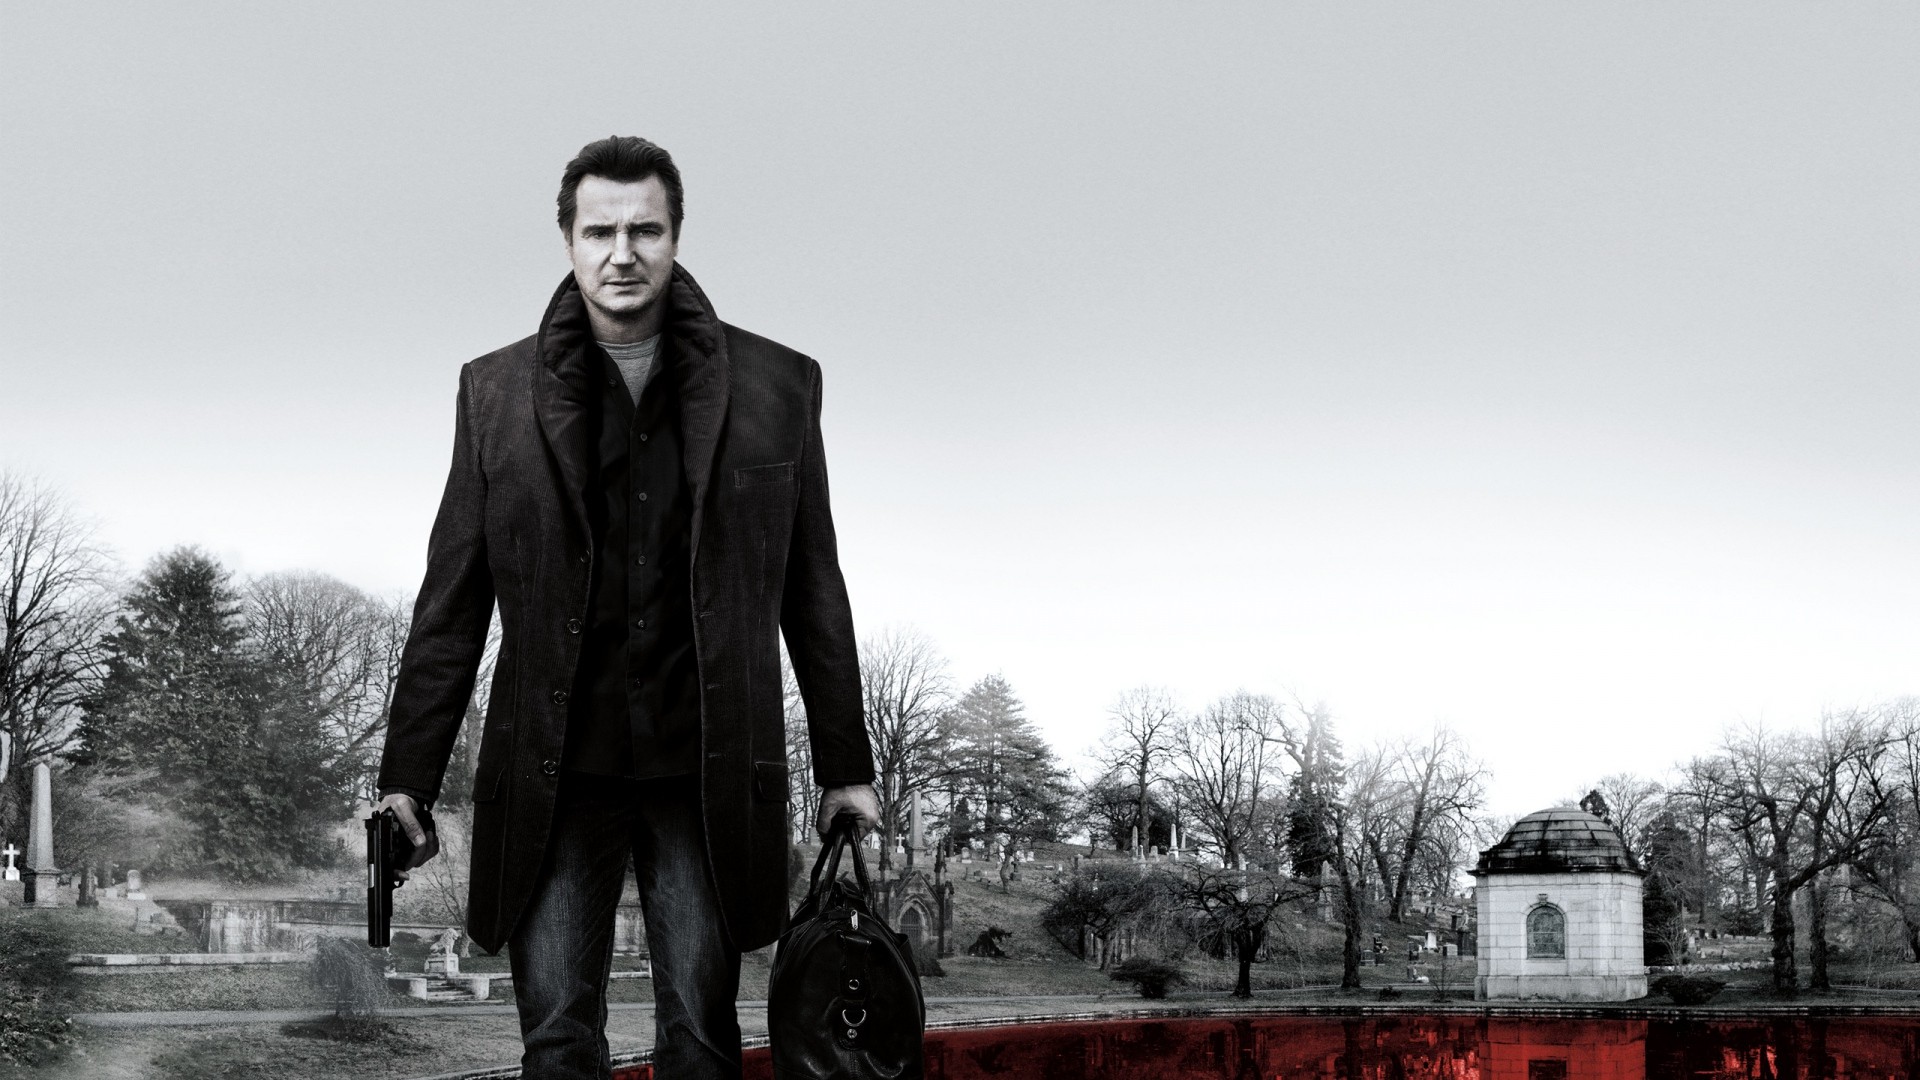 People 1920x1080 celebrity men actor movies Liam Neeson gun movie poster selective coloring cemetery grave frontal view